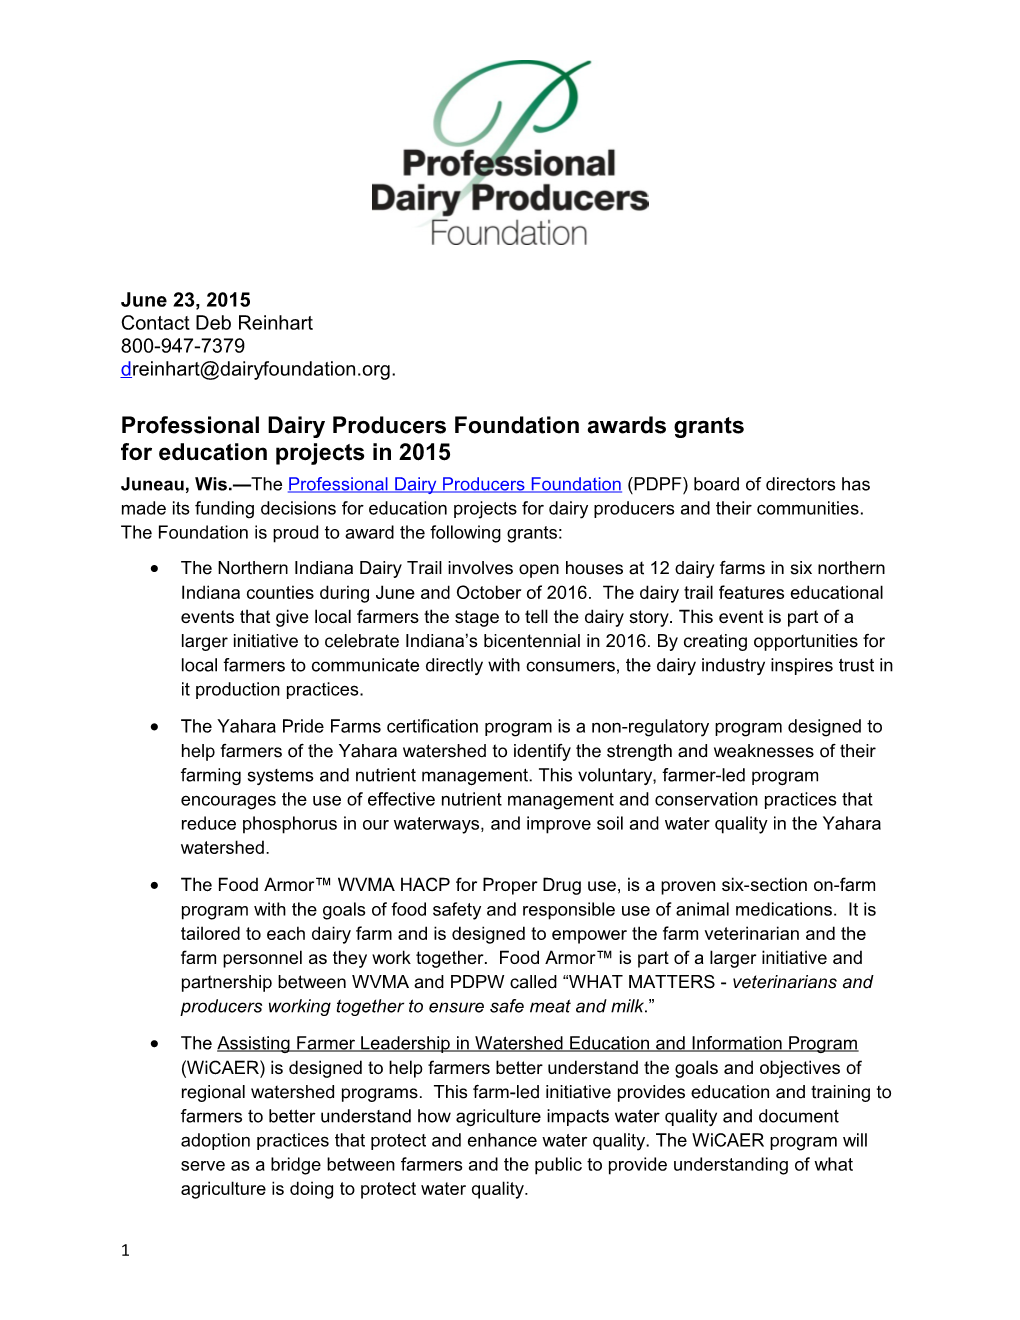 Professional Dairy Producers Foundation Awards Grants for Education Projects in 2015